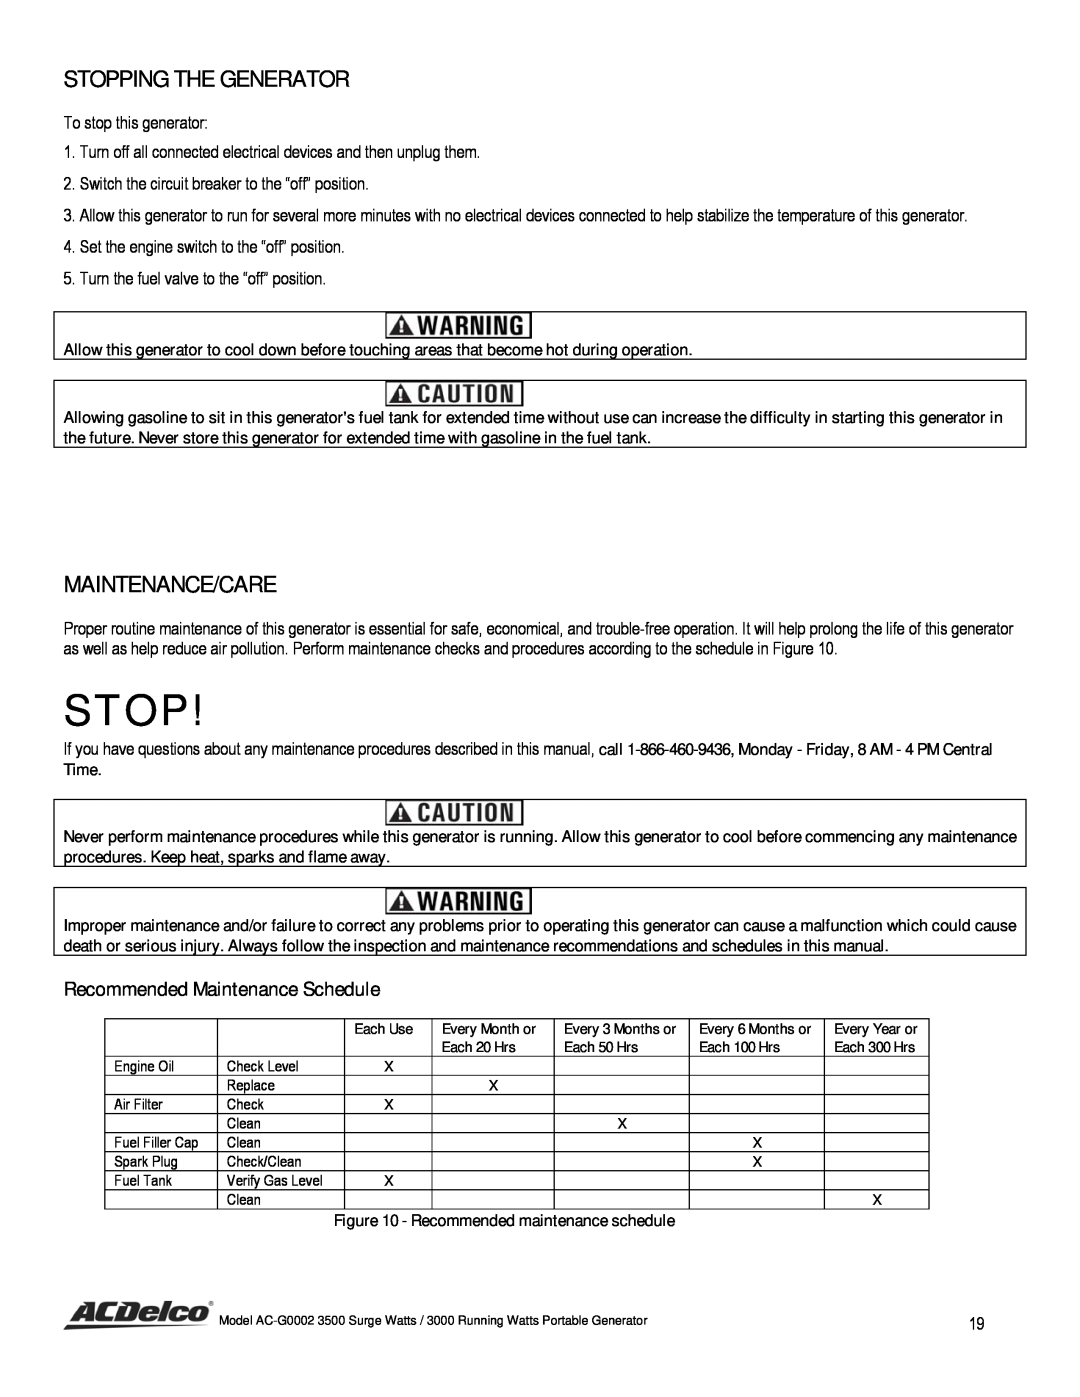 ACDelco AC-G0002 instruction manual Stopping The Generator, Maintenance/Care, Recommended Maintenance Schedule 